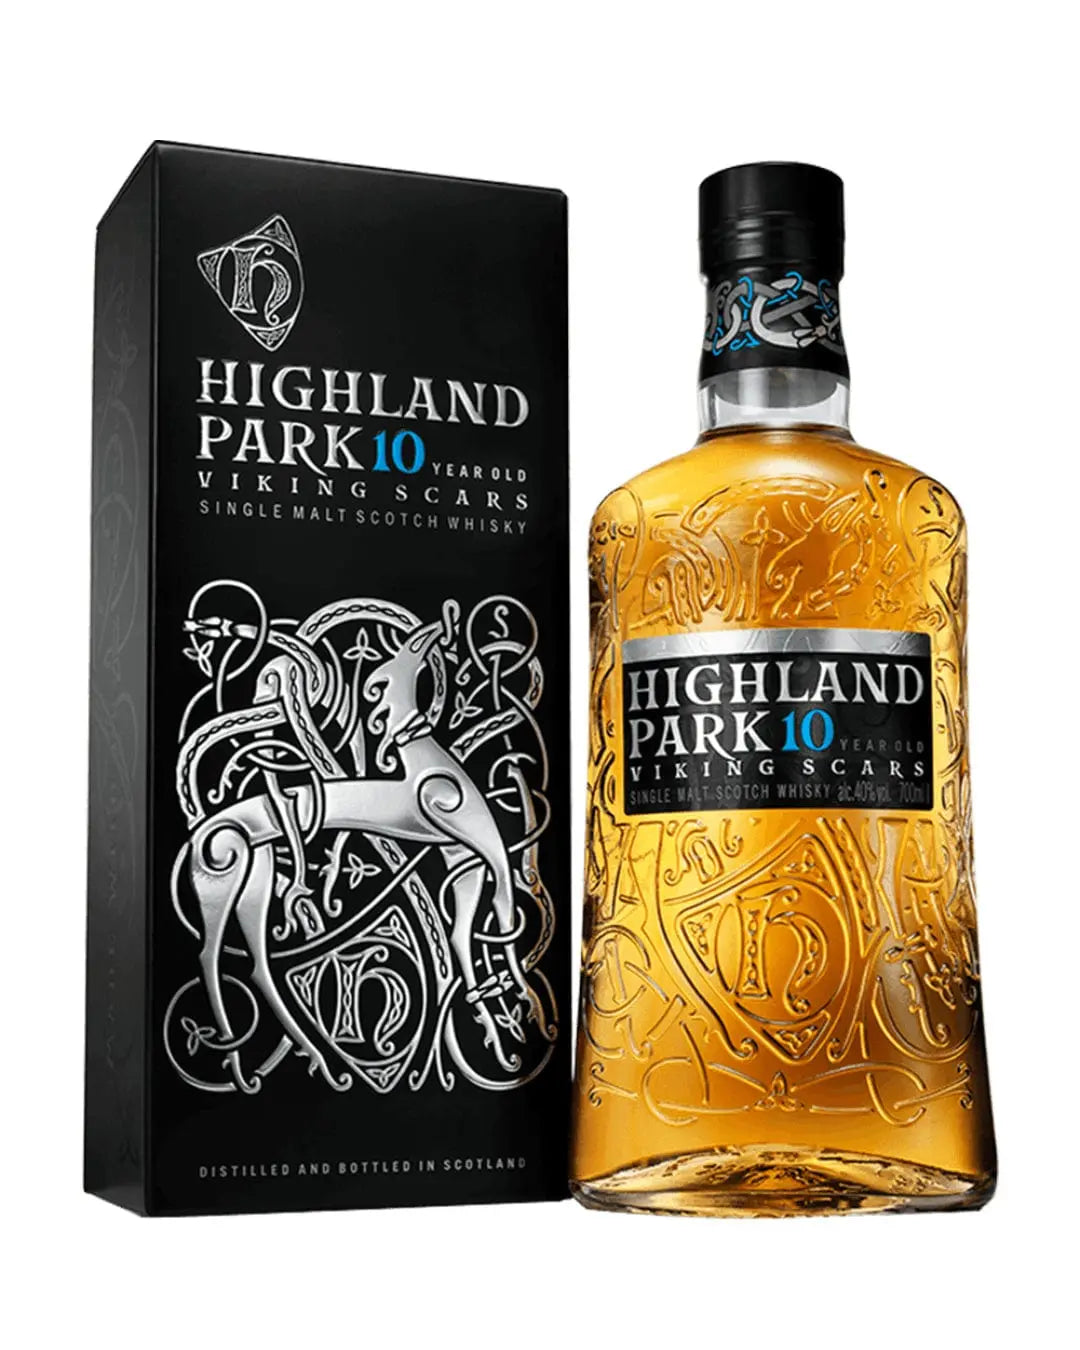 Highland Park 10 Year Old Viking Scars Whisky, 70 cl Whisky